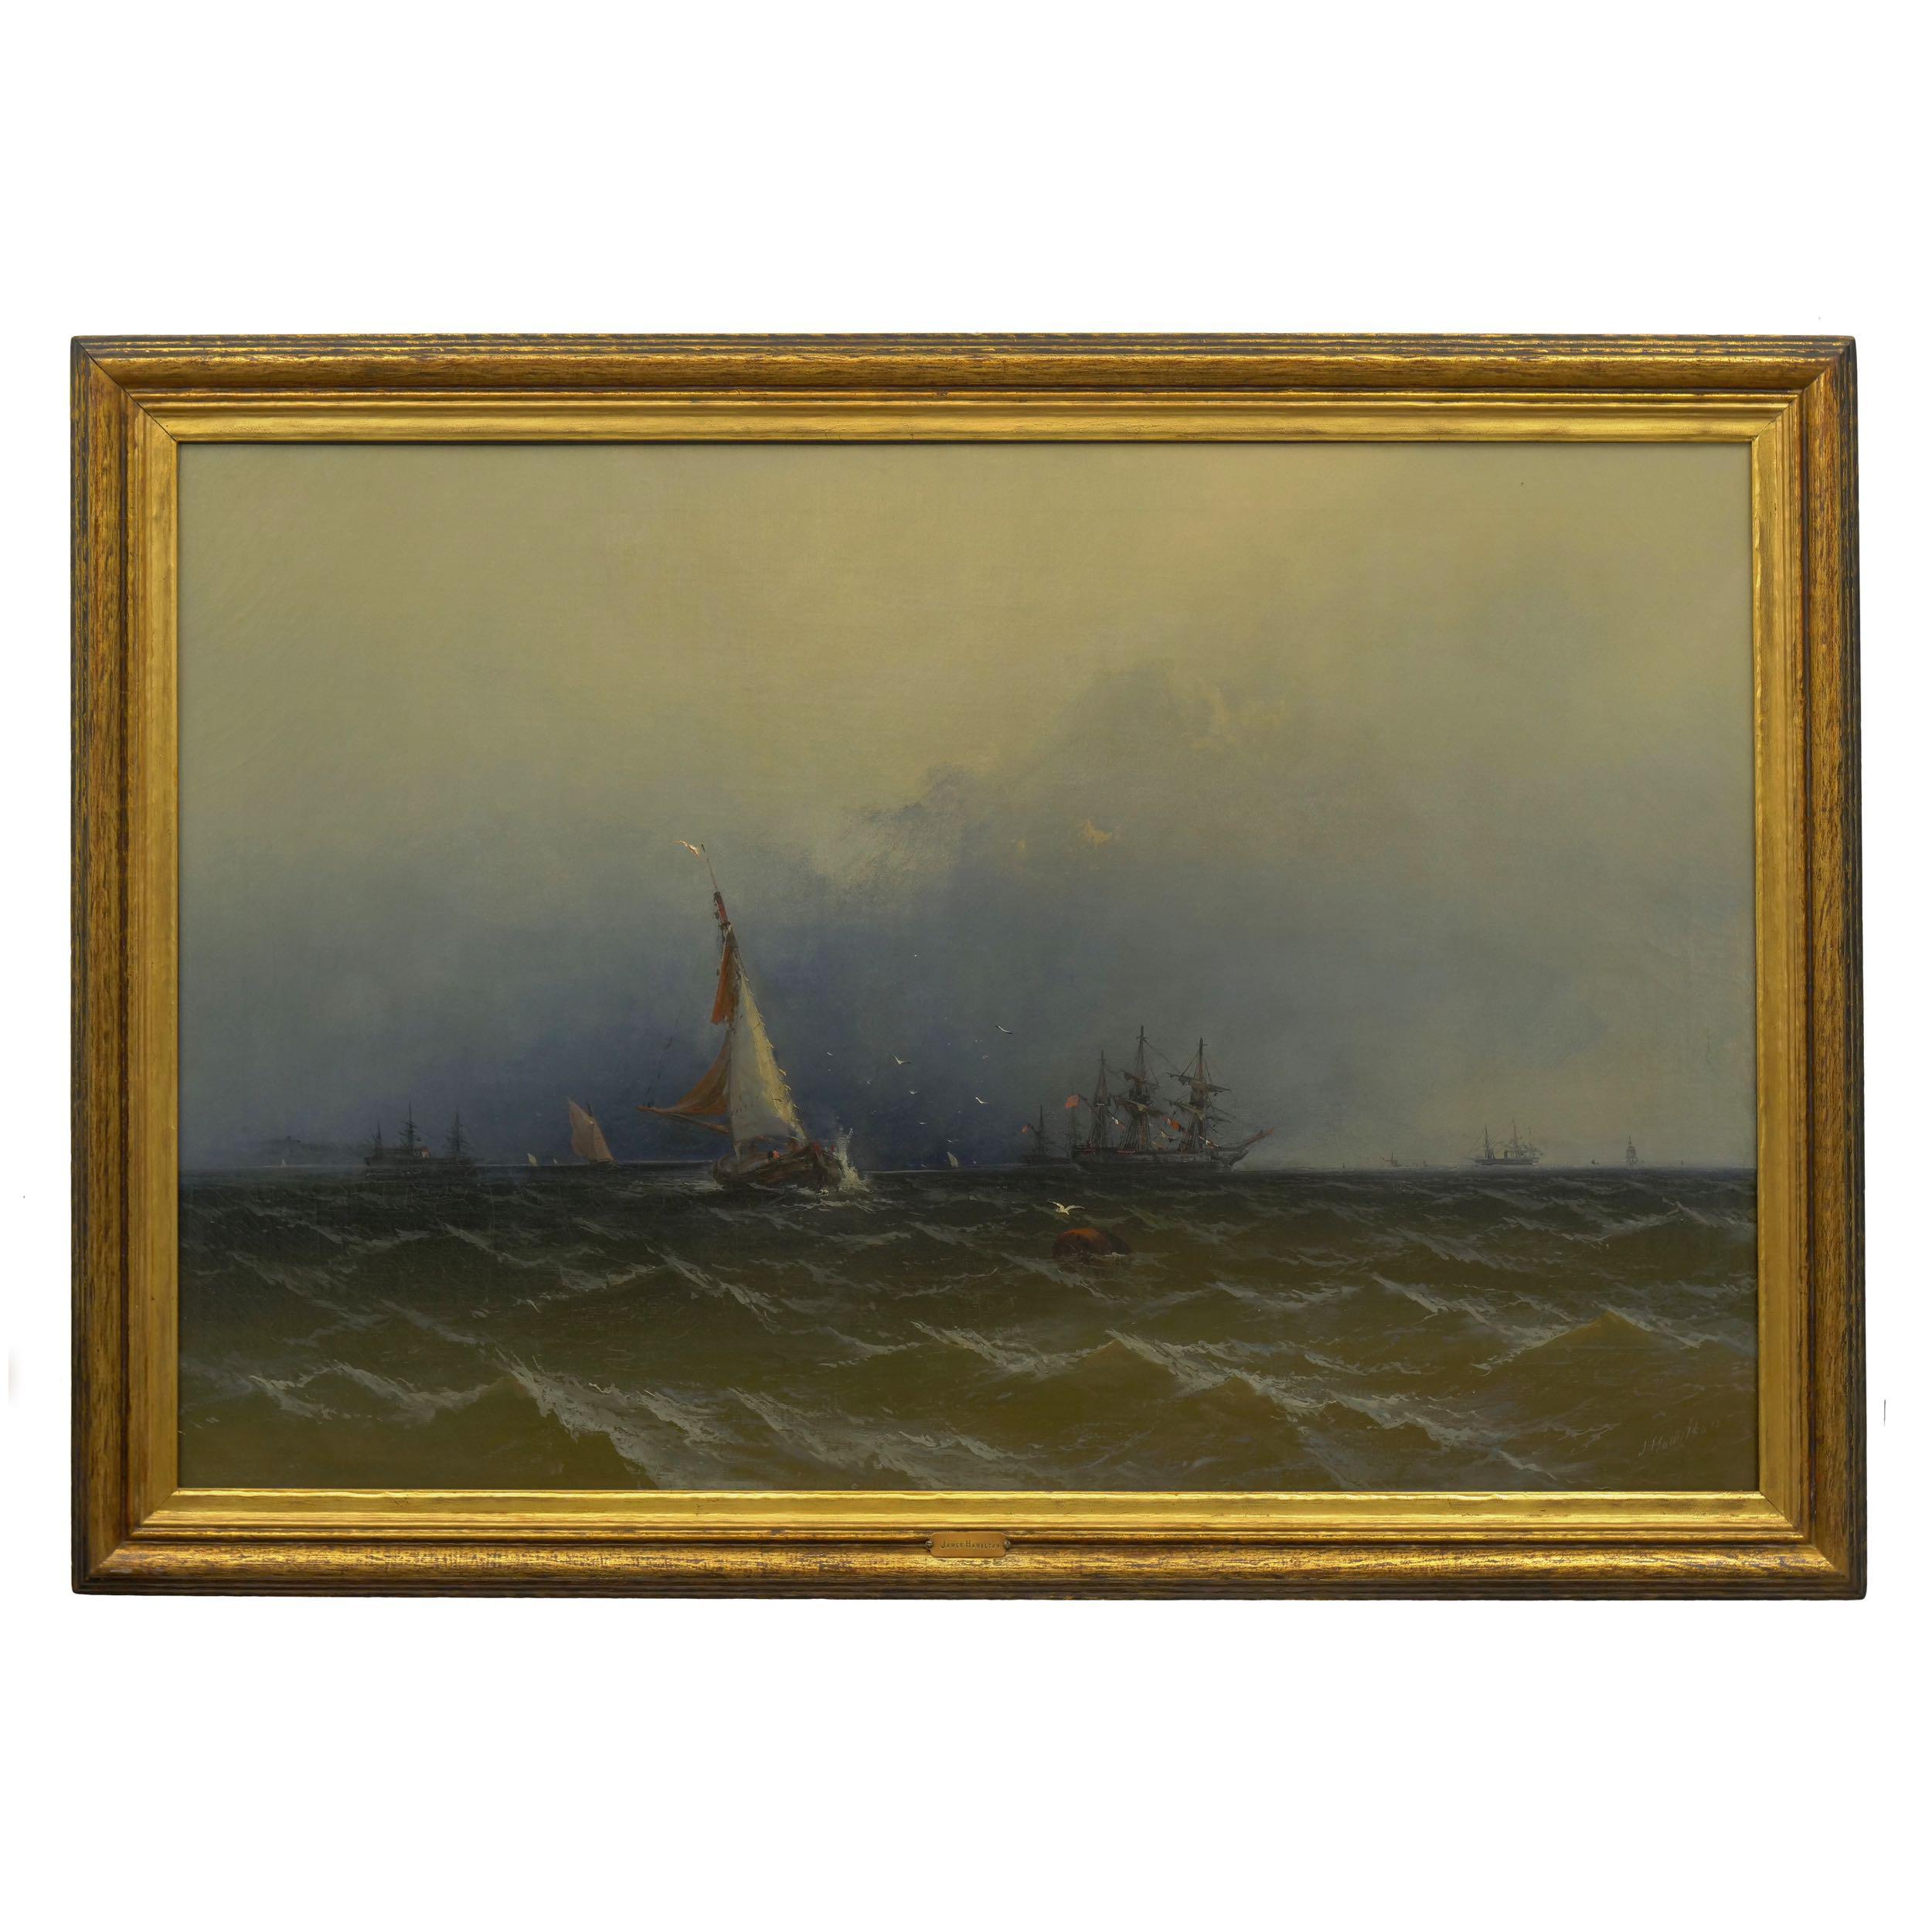 A moving scene with the energy of the wind evident in the chaos of the vessels as light plays through the dense foggy atmosphere of the looming clouds, casting its variations of warm direct light on the barrel bobbing in the nearest waves and its